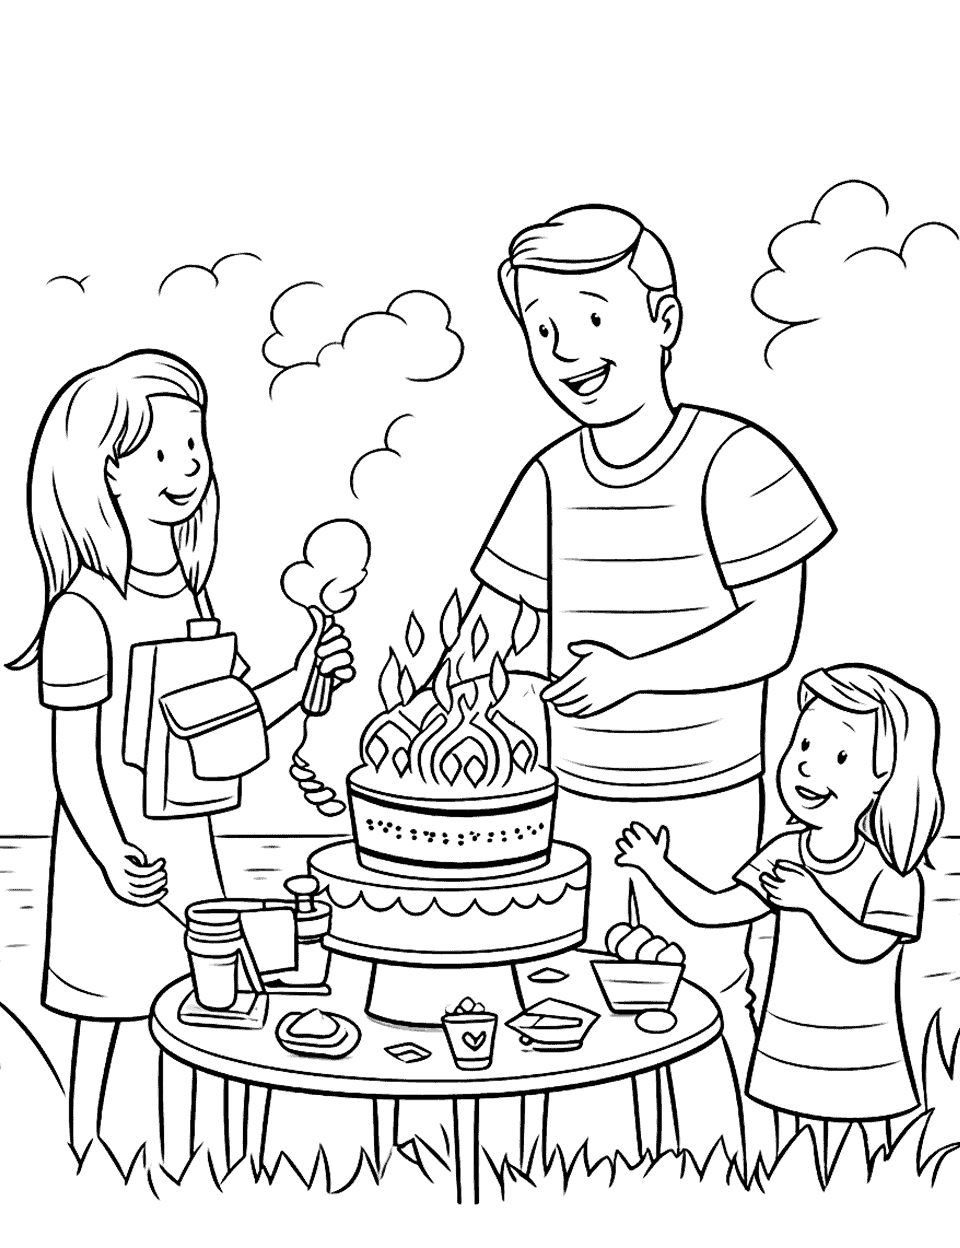 Dad's Birthday BBQ Happy Coloring Page - Dad at the grill, with kids handing him birthday presents.